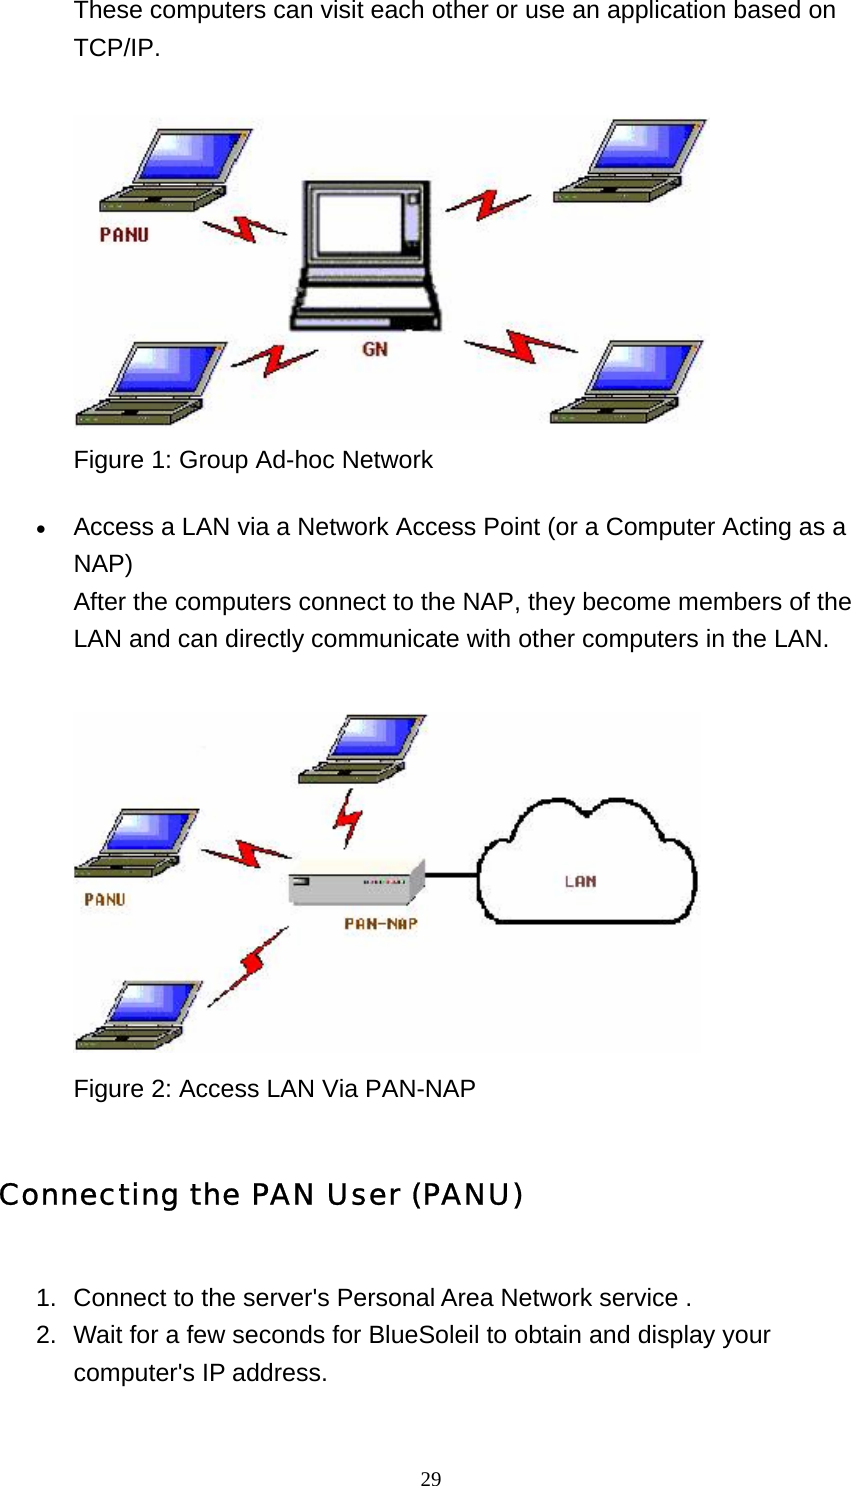   29These computers can visit each other or use an application based on TCP/IP.   Figure 1: Group Ad-hoc Network • Access a LAN via a Network Access Point (or a Computer Acting as a NAP) After the computers connect to the NAP, they become members of the LAN and can directly communicate with other computers in the LAN.   Figure 2: Access LAN Via PAN-NAP Connecting the PAN User (PANU) 1.  Connect to the server&apos;s Personal Area Network service .   2.  Wait for a few seconds for BlueSoleil to obtain and display your computer&apos;s IP address.   